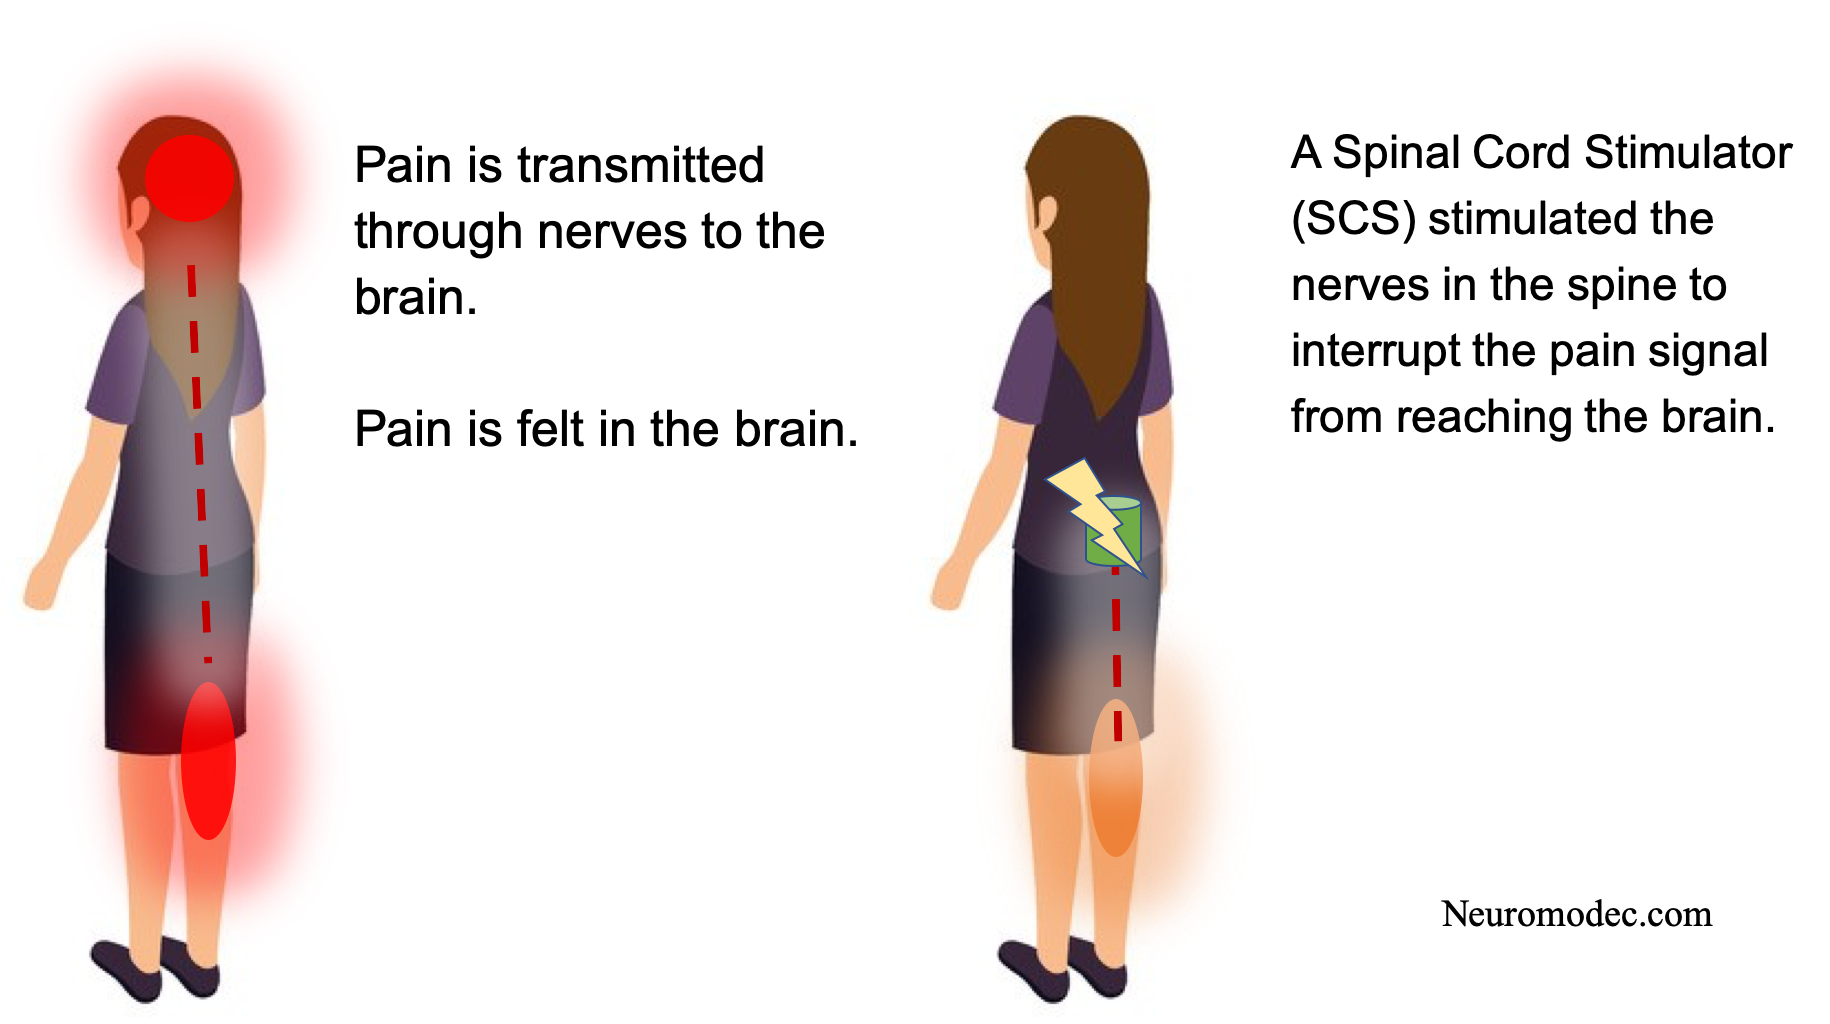 What is Spinal Cord Stimulation (SCS)?